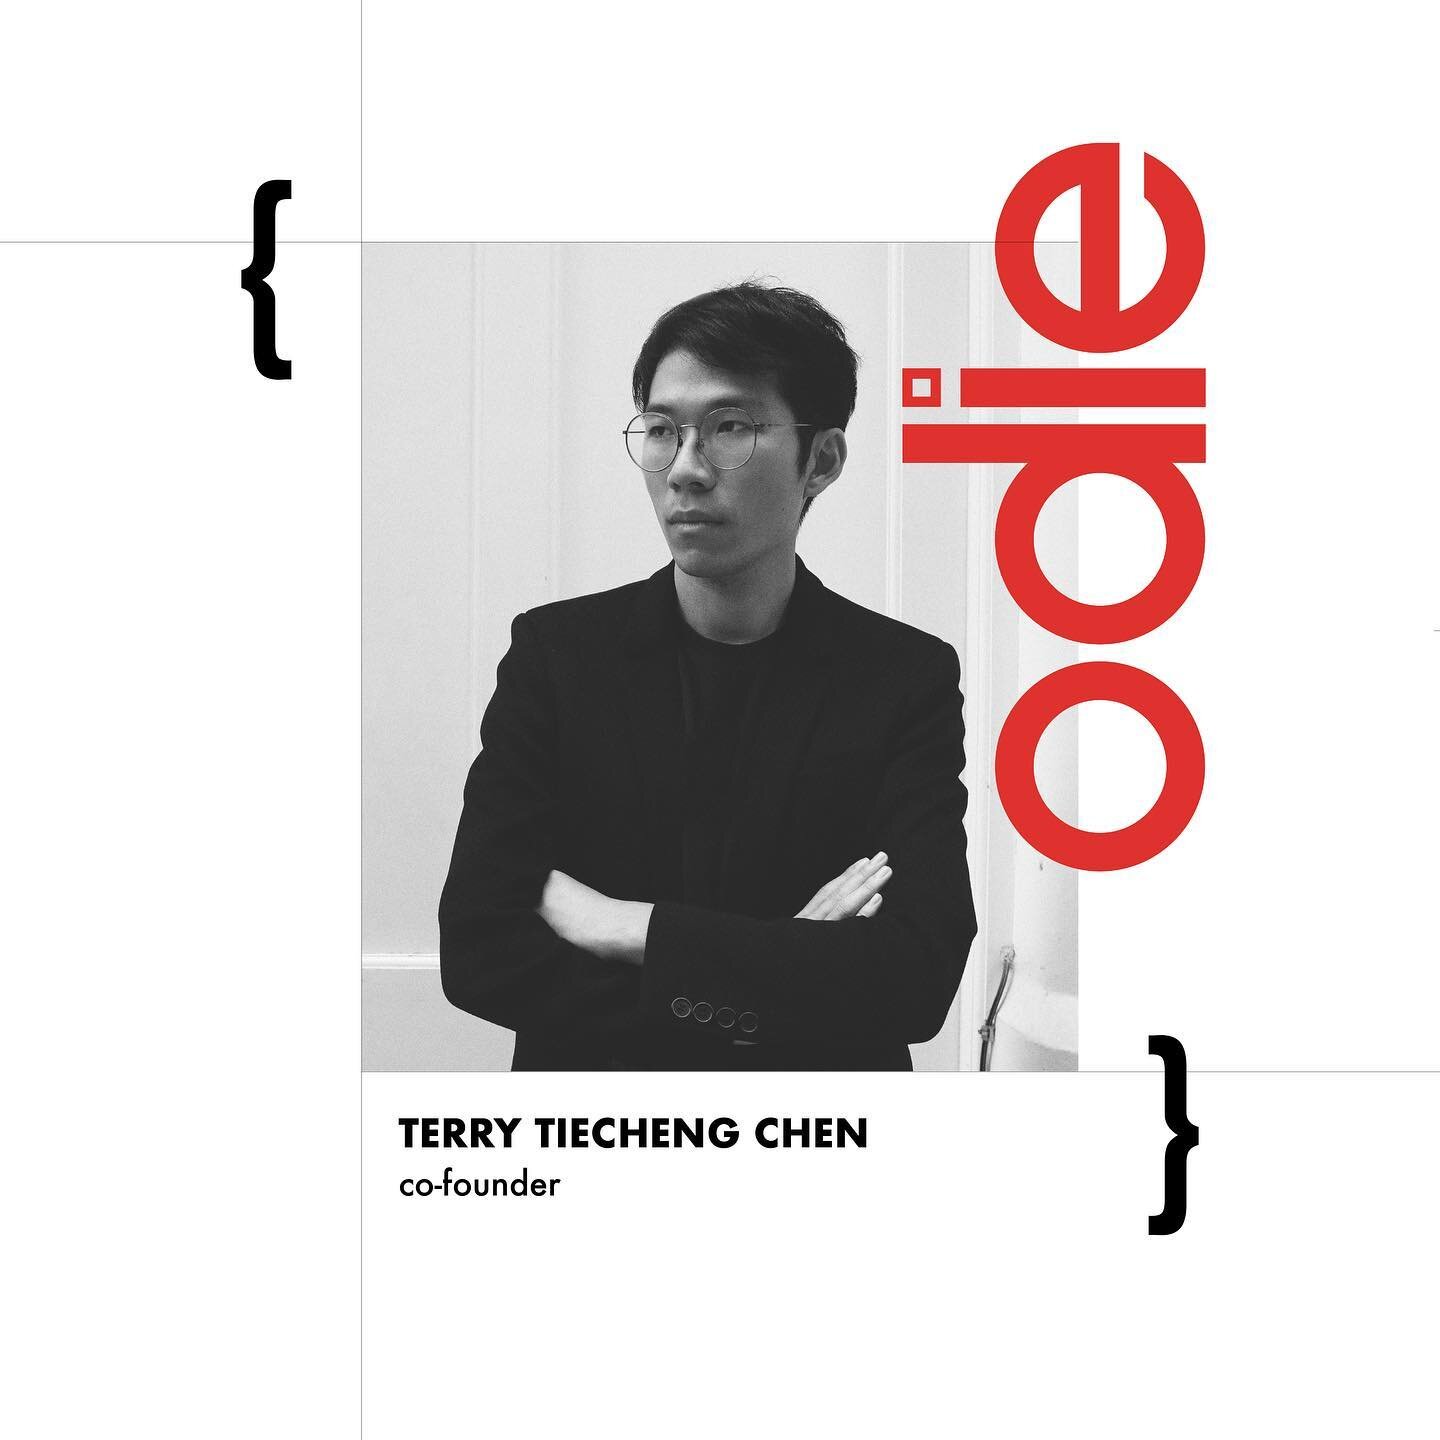 Terry Tiecheng Chen, co-founder of Odie, shares some of his personal ideas, theories, and aspirations on design. As a digital designer with an architecture background, Terry has come a long way to explore creativities from a different dimension with 